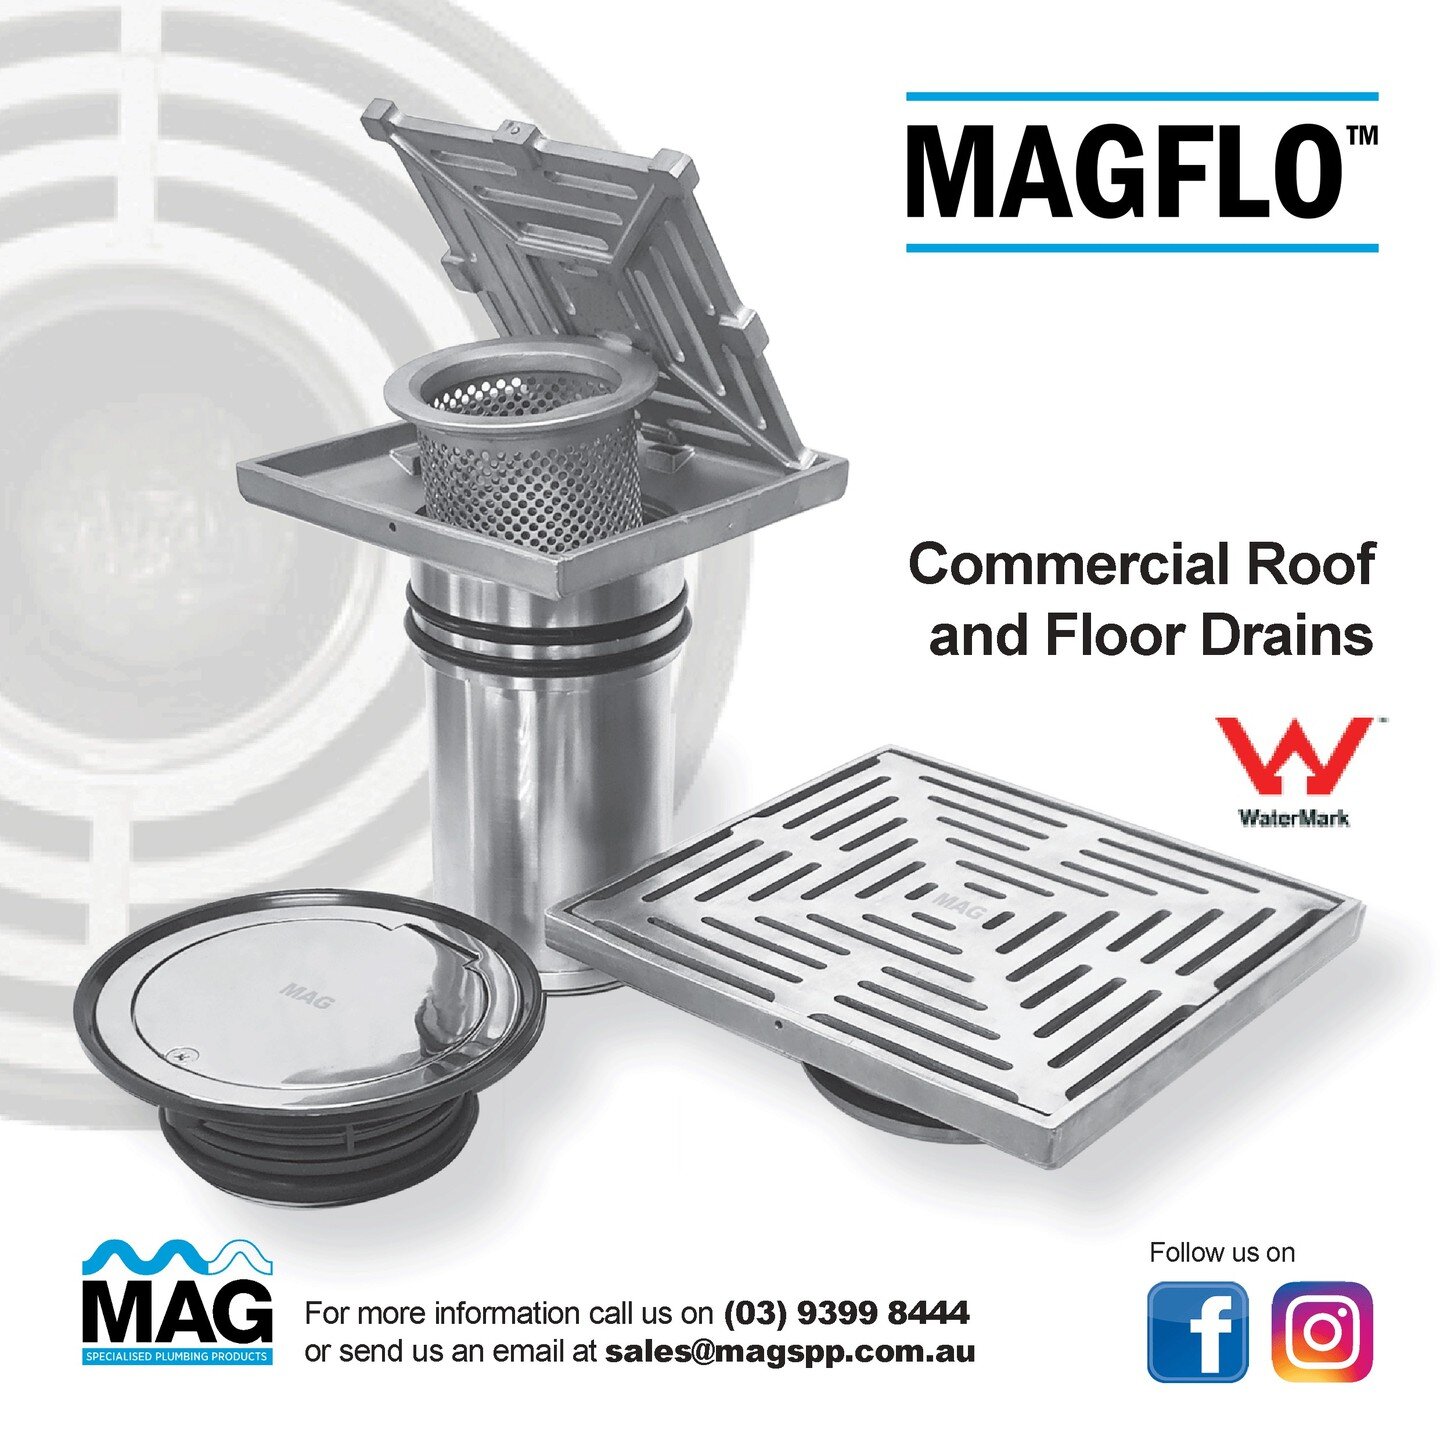 Give us a call to find out more about our New MAGFLO range of Commercial Roof and Floor Drains 

Contact us today and we&rsquo;ll be happy to assist you with any enquiry.
T. (03) 9399 8444
E. sales@magspp.com.au

#BuildcorpVictoria #Victoriaconstruct